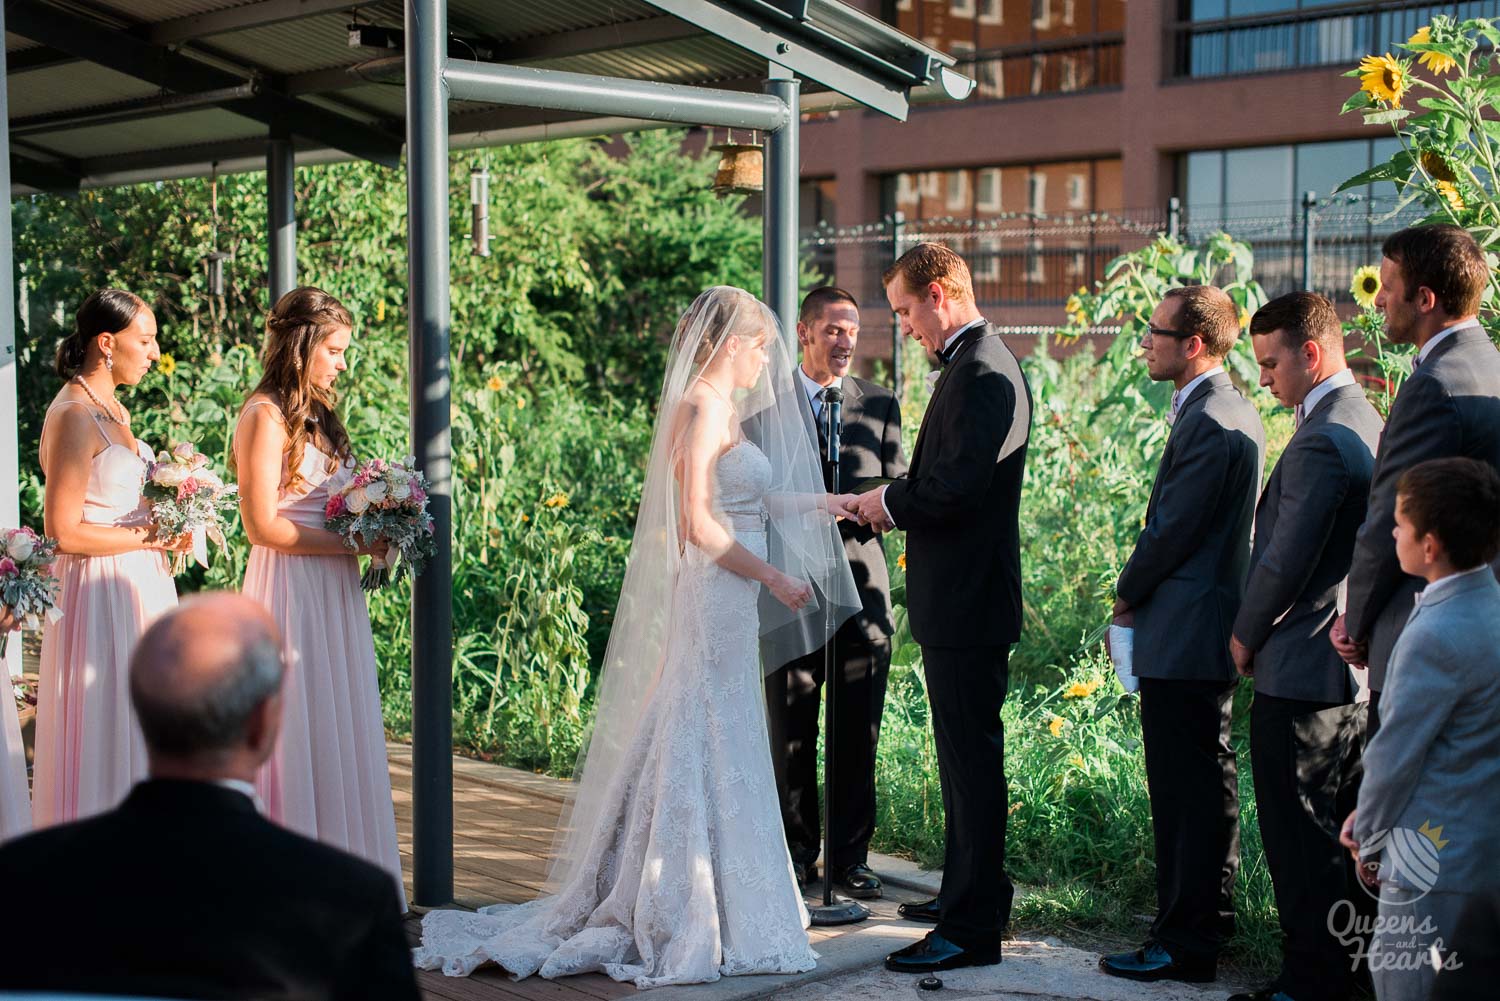 The 10 Idyllic Wedding Venues in Madison, WI That Will Knock Your Socks Off